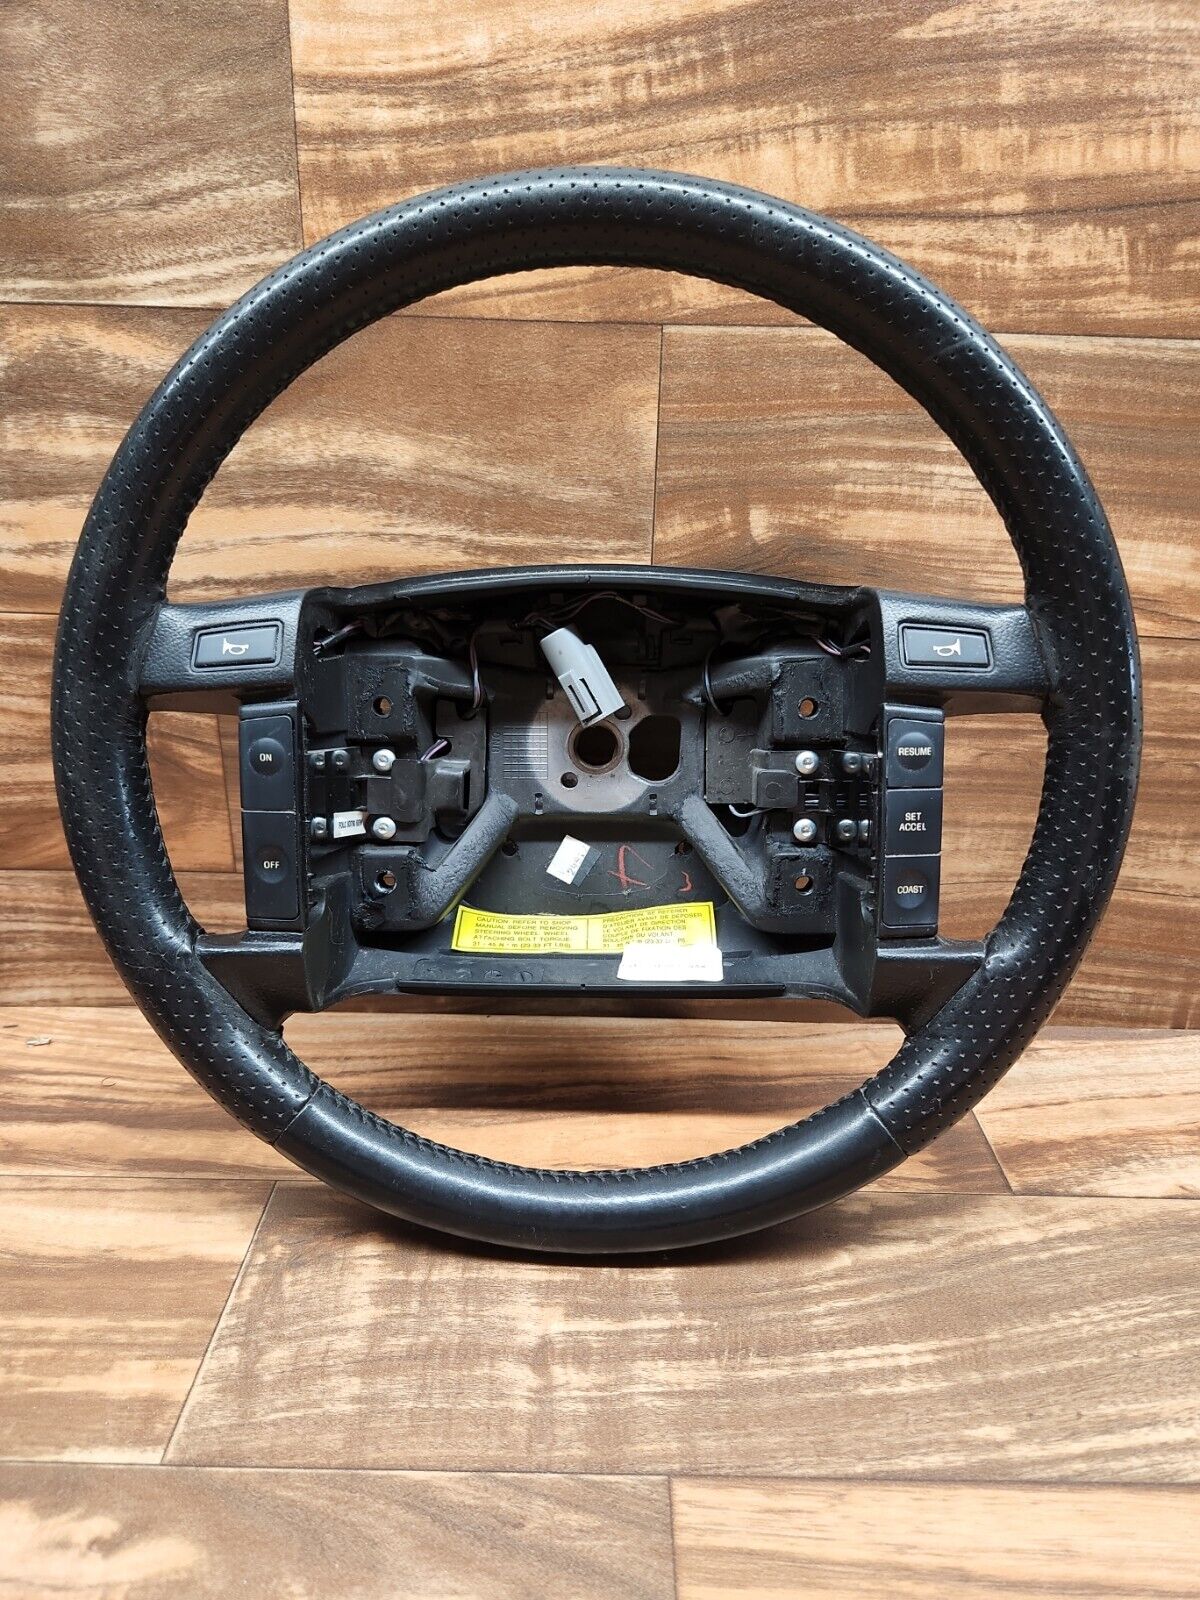 1990 Lincoln Mark 7, Mark VII LSC Leather wrapped steering wheel Foxbody Mustang